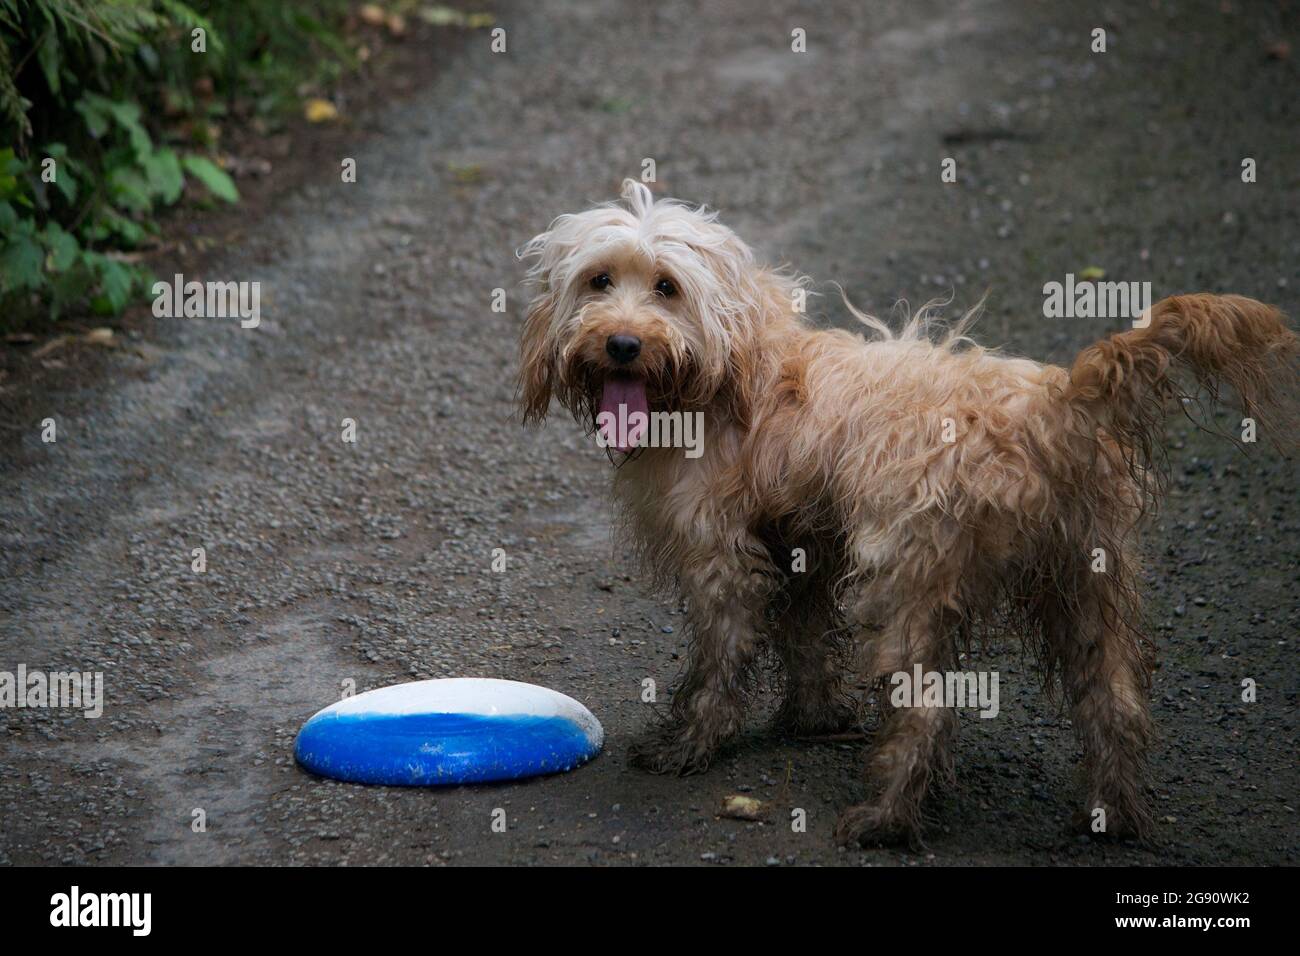 A cute happy apricot (sandy golden) coloured cockapoo dog standing on a tarmac road with a frisbee after playing fetch. Wagging its shaggy tail and pa Stock Photo